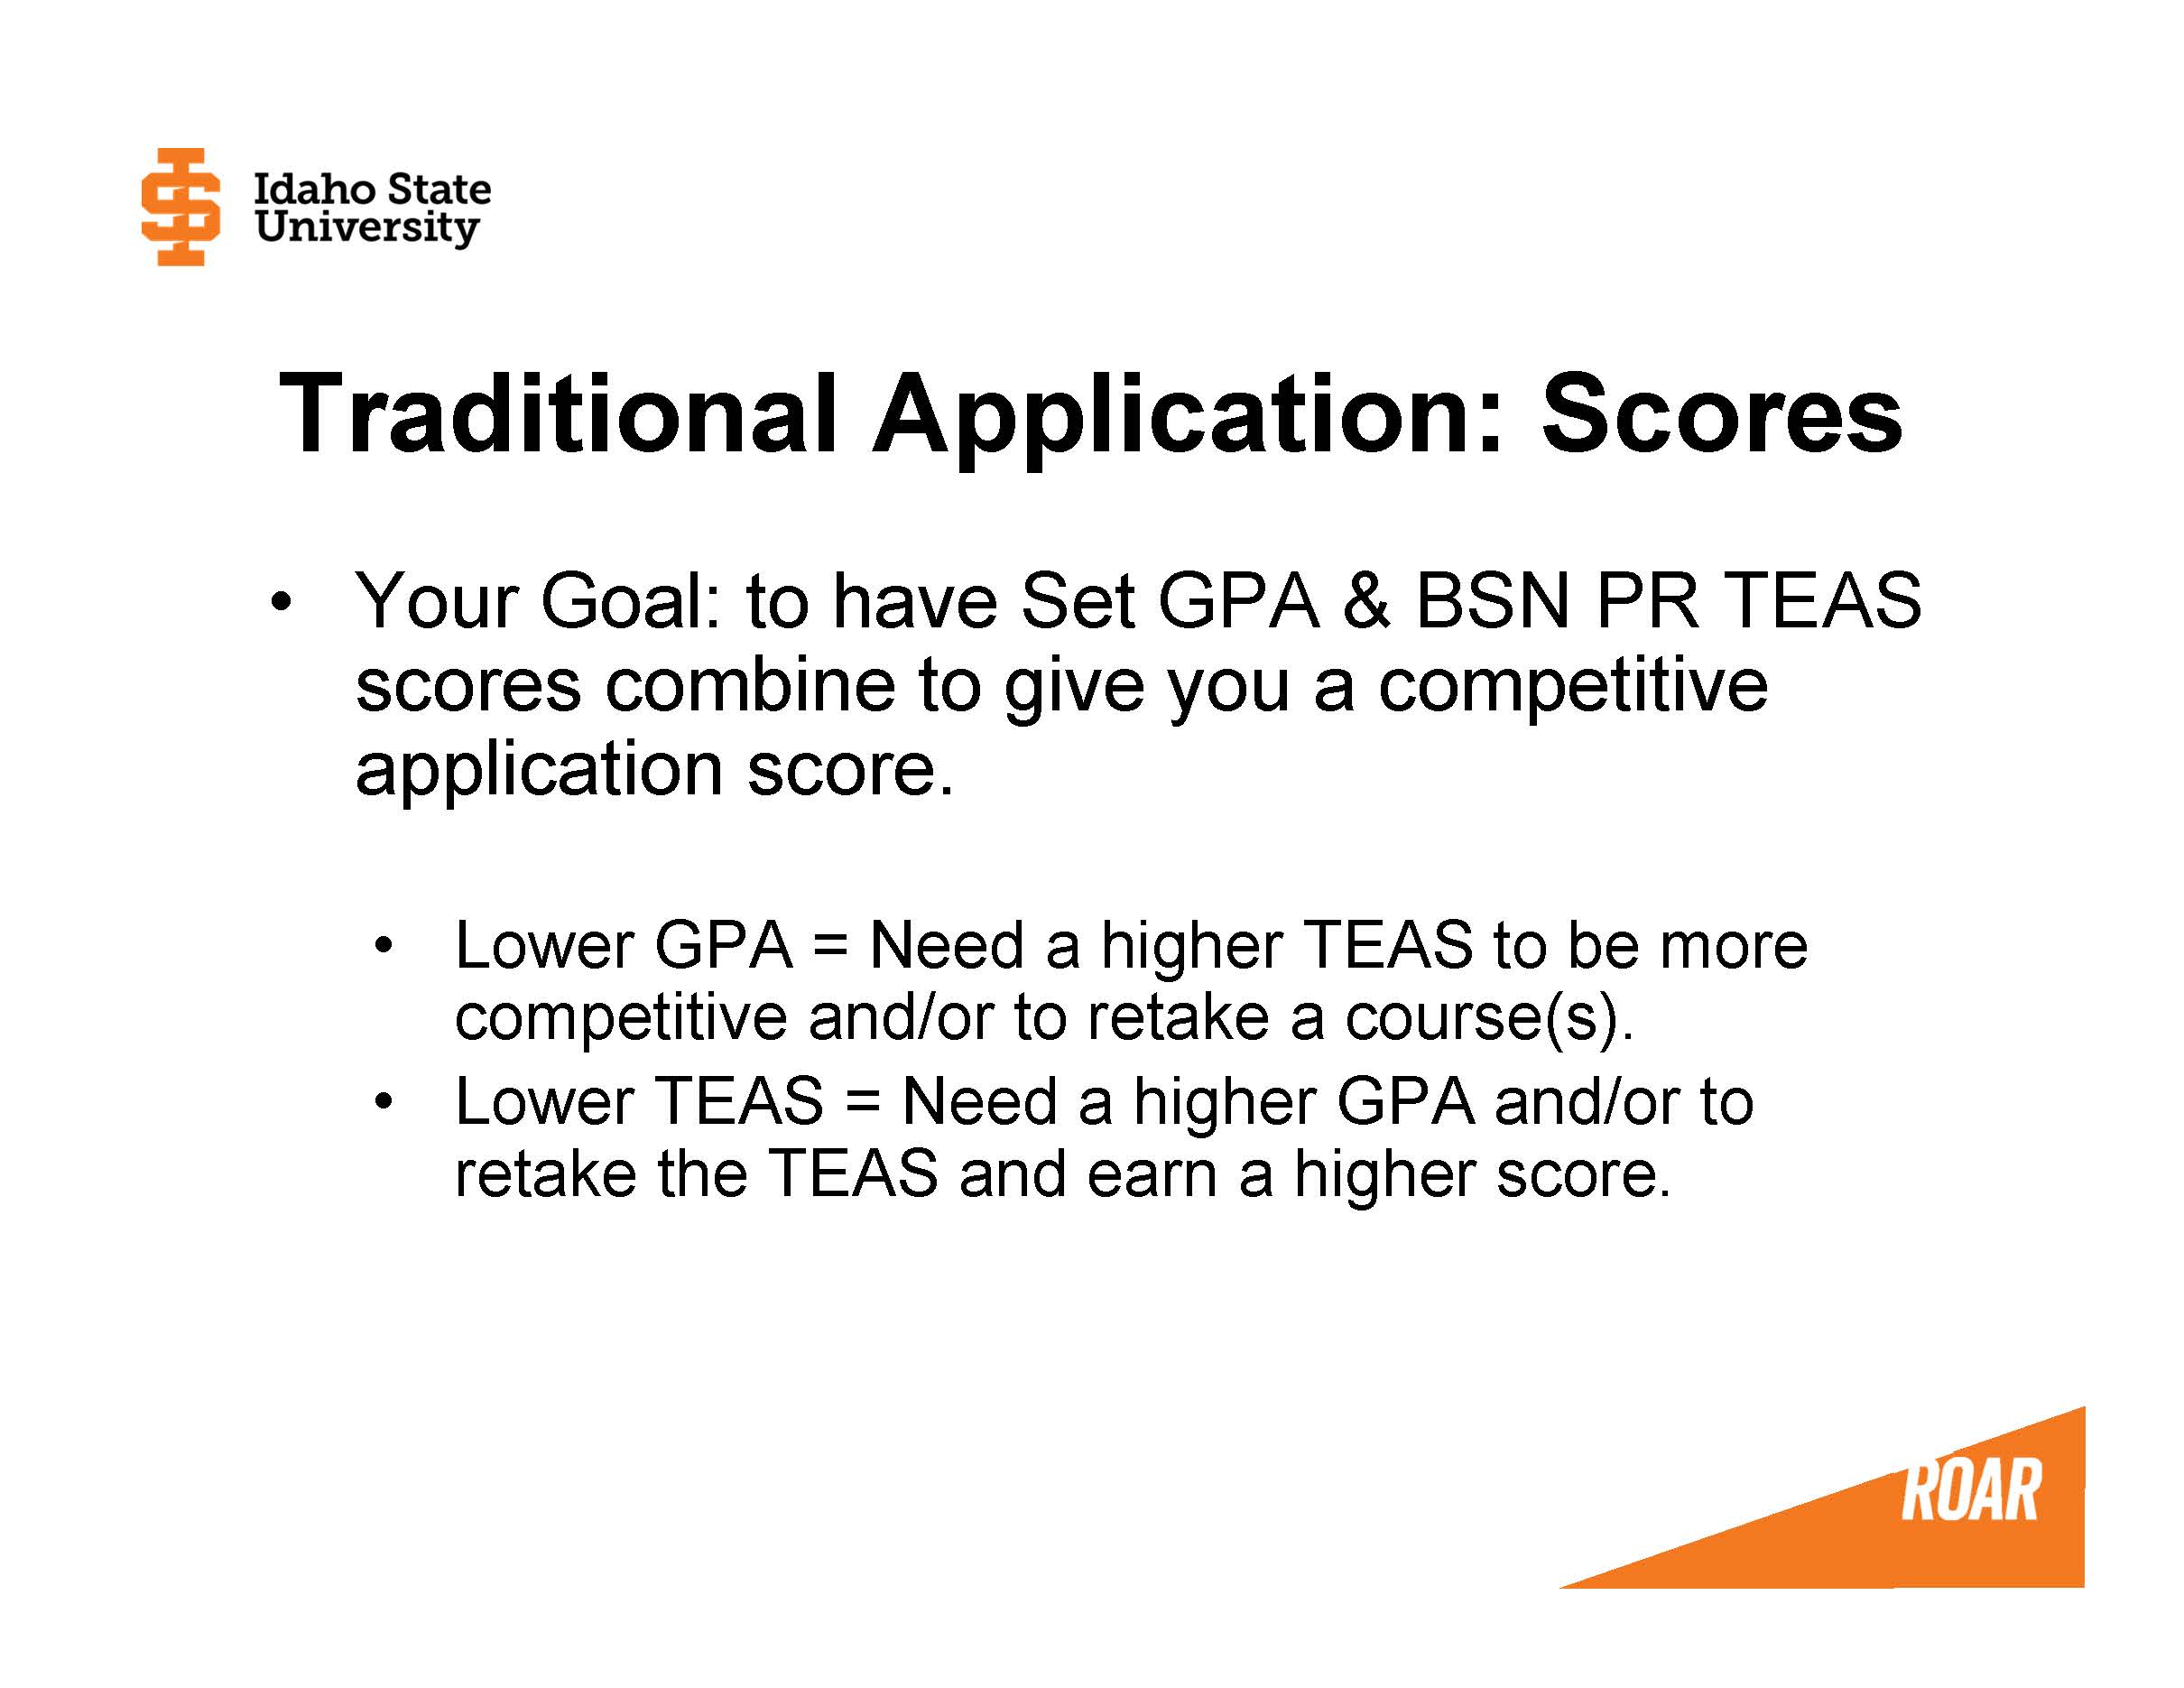 Your Goal: to have Set GPA & BSN PR TEAS scores combine to give you a competitive application score.  Lower GPA = Need a higher TEAS to be more competitive and/or to retake a course(s). Lower TEAS = Need a higher GPA and/or to retake the TEAS and earn a higher score.